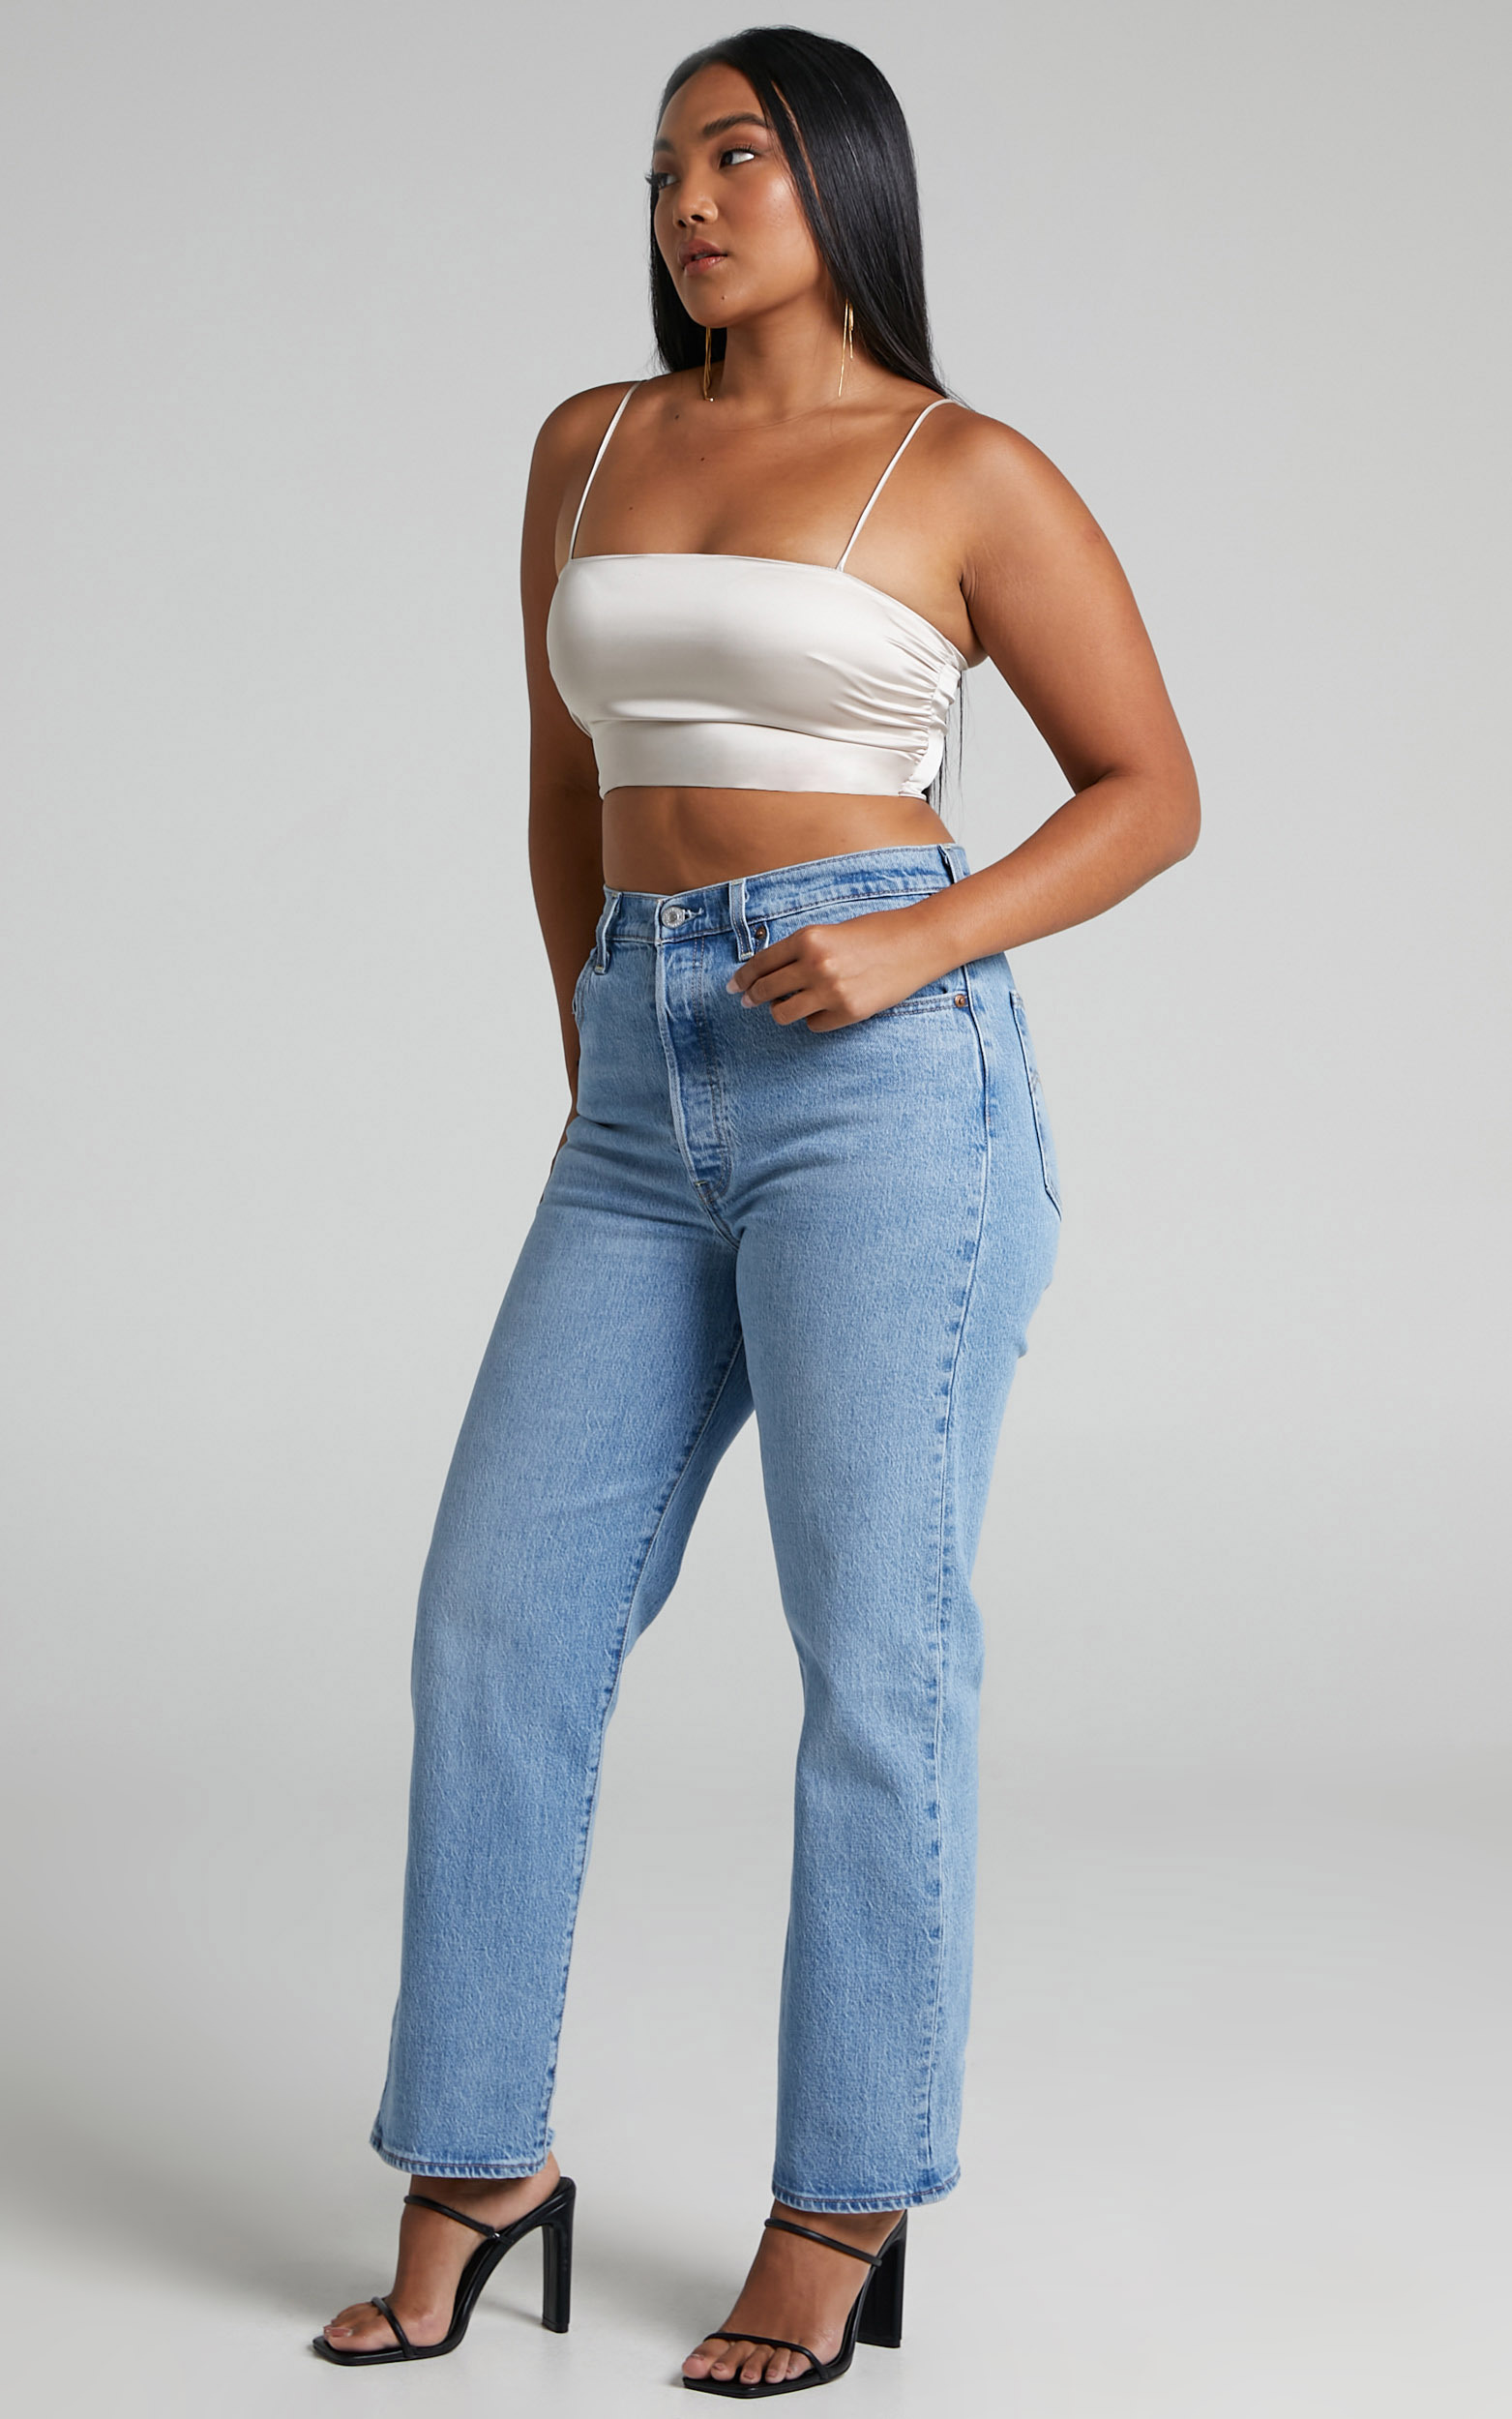 Blessy Strappy Fitted Satin Crop Top in Cream - 06, CRE1, hi-res image number null